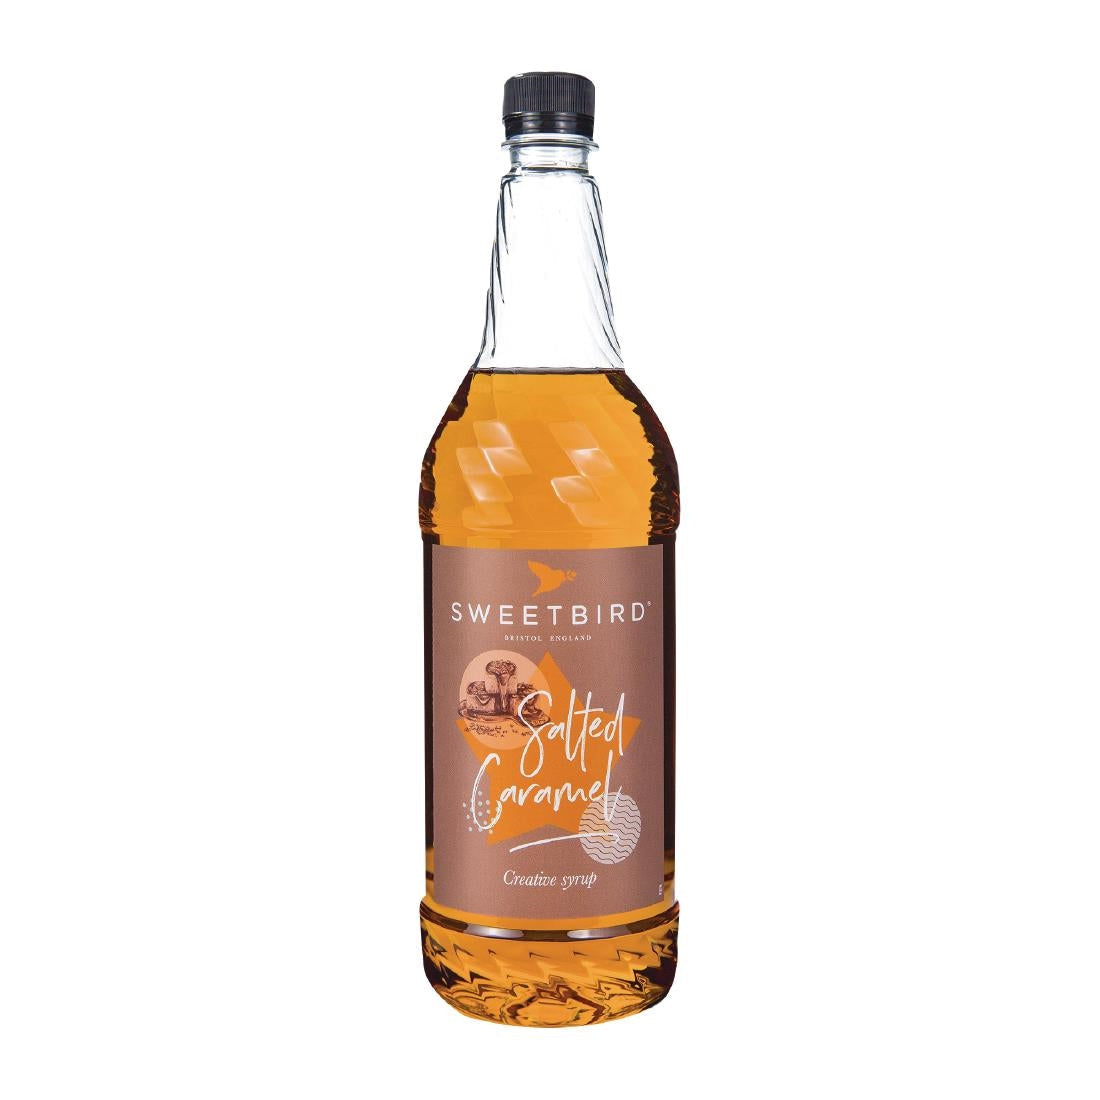 FS247 Sweetbird Salted Caramel Syrup 1 Ltr JD Catering Equipment Solutions Ltd